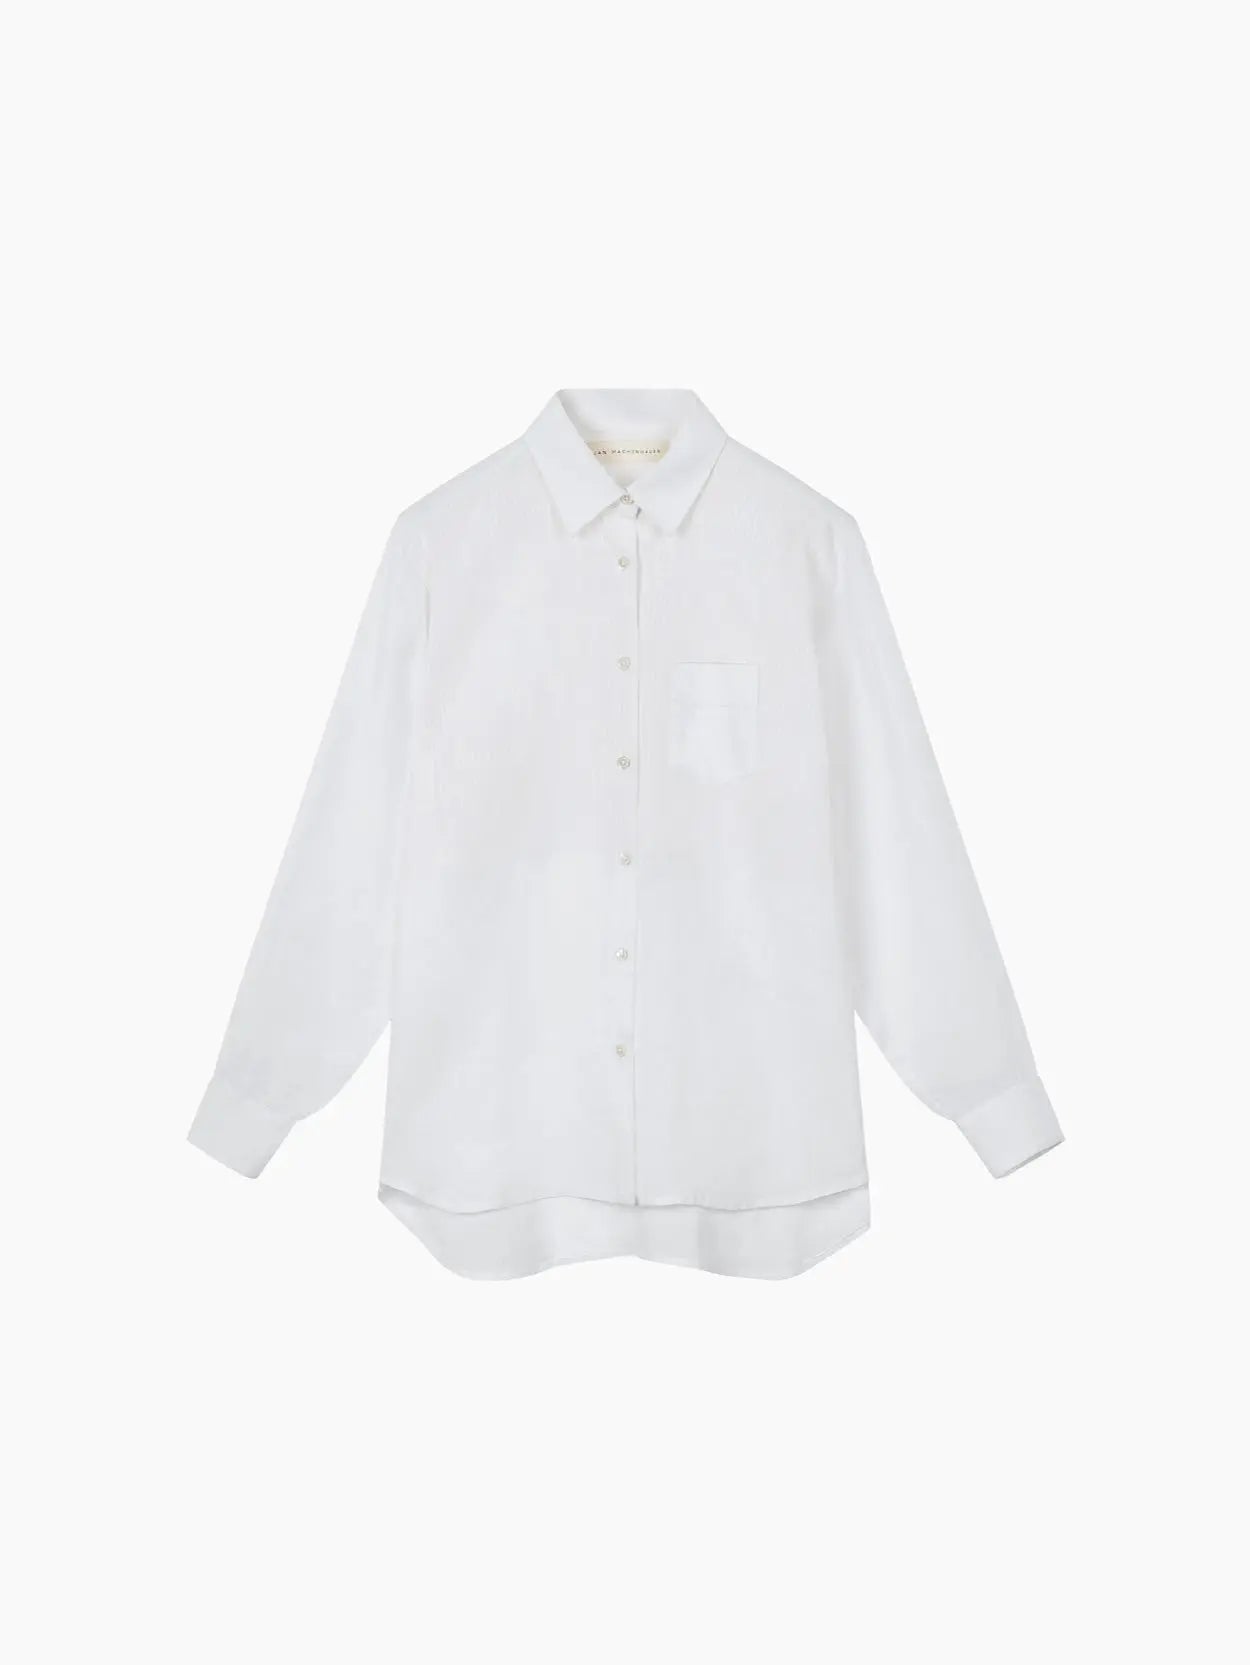 A white long-sleeve button-up shirt with a single chest pocket and a classic collar is neatly displayed against a plain white background. The Galla Linen Shirt Block Print Stripe by Jan Machenhauer, available at Bassalstore in Barcelona, features a relaxed fit with slightly rounded hems.